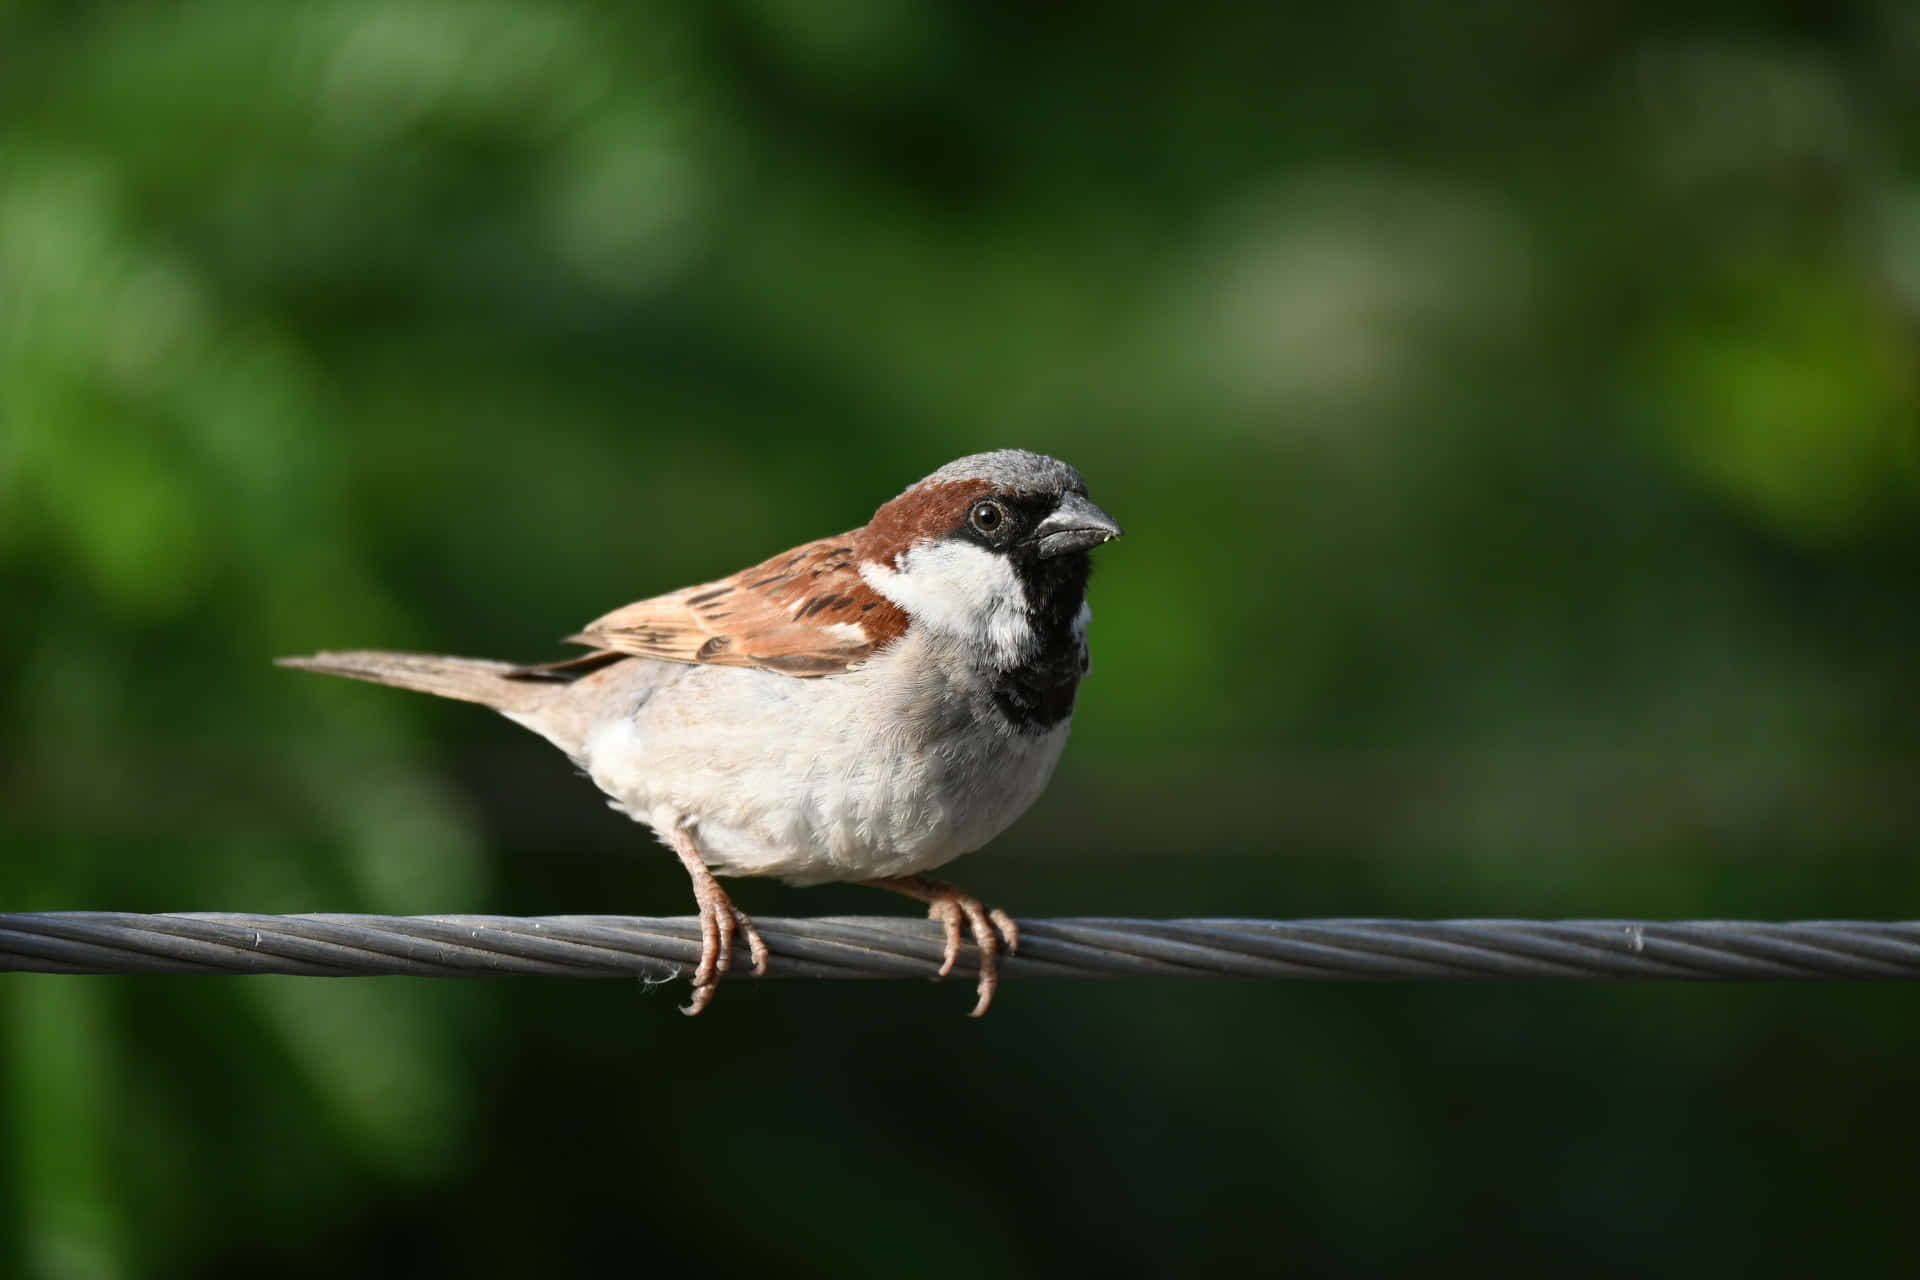 A Lovely Sparrow Sitting on a Tree Branch